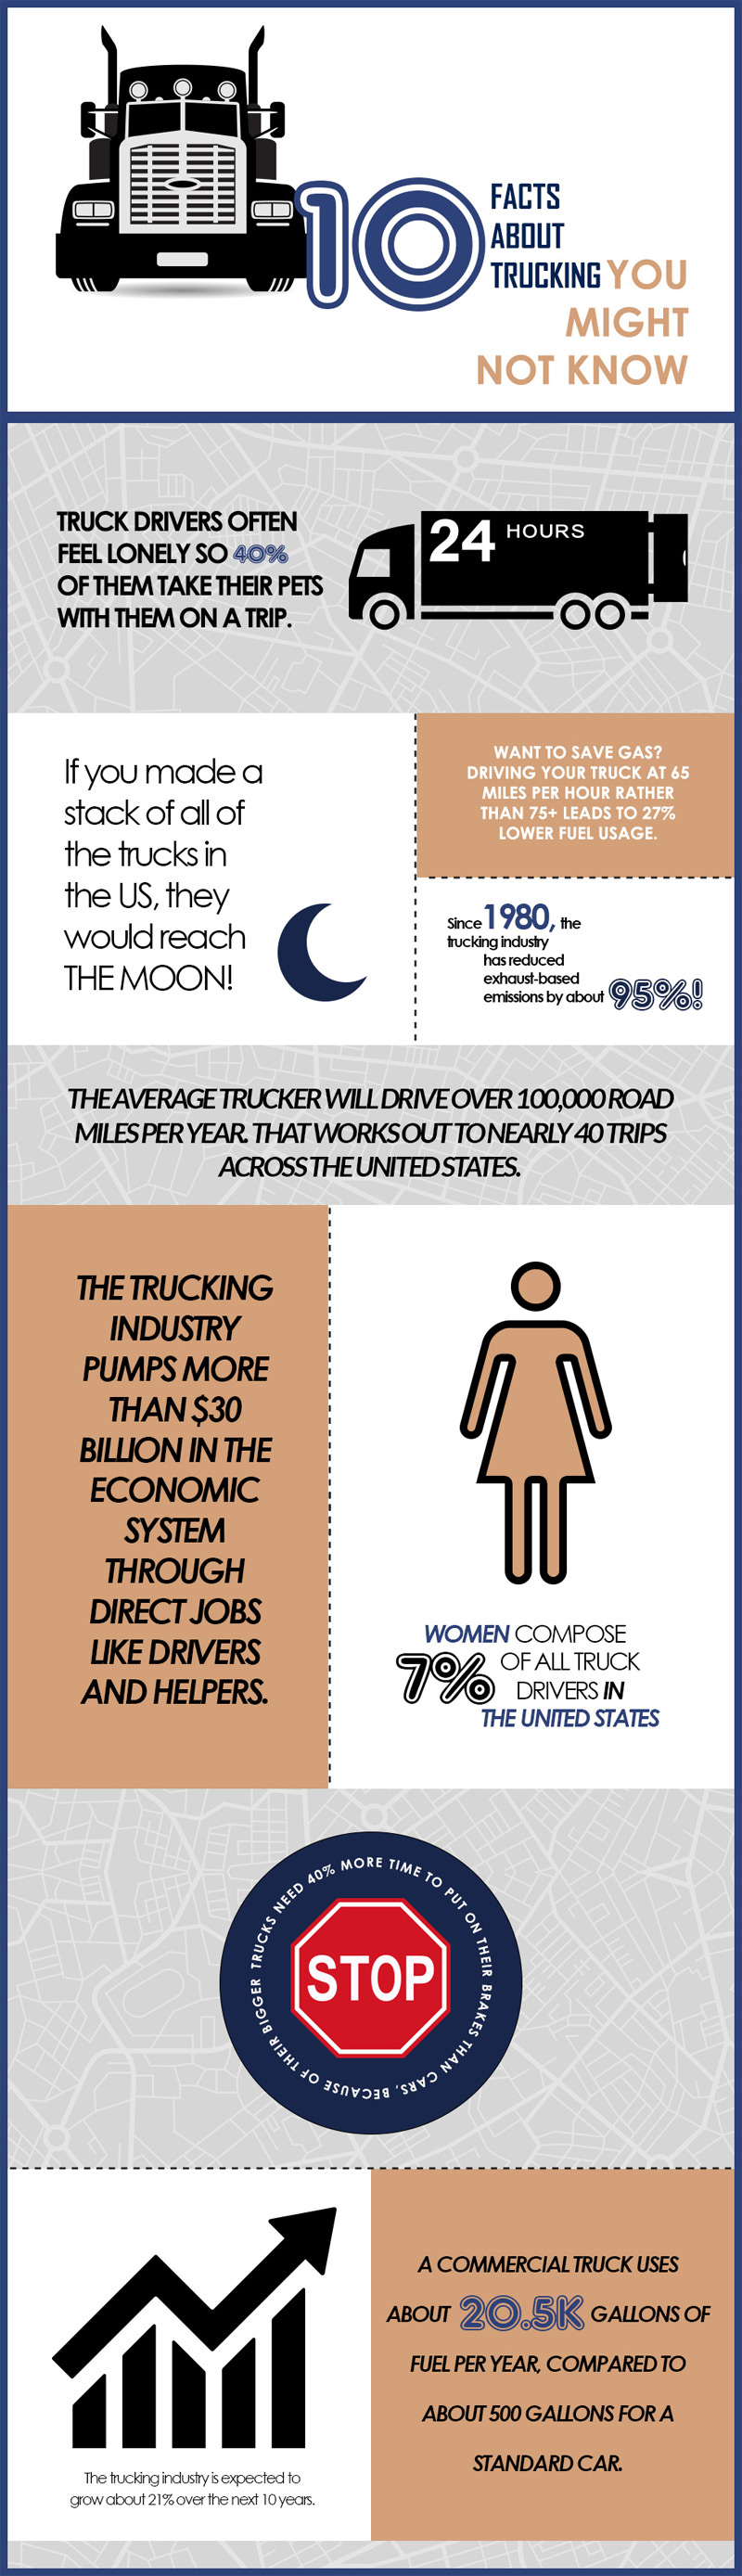 10 Facts About Trucking #Transportation